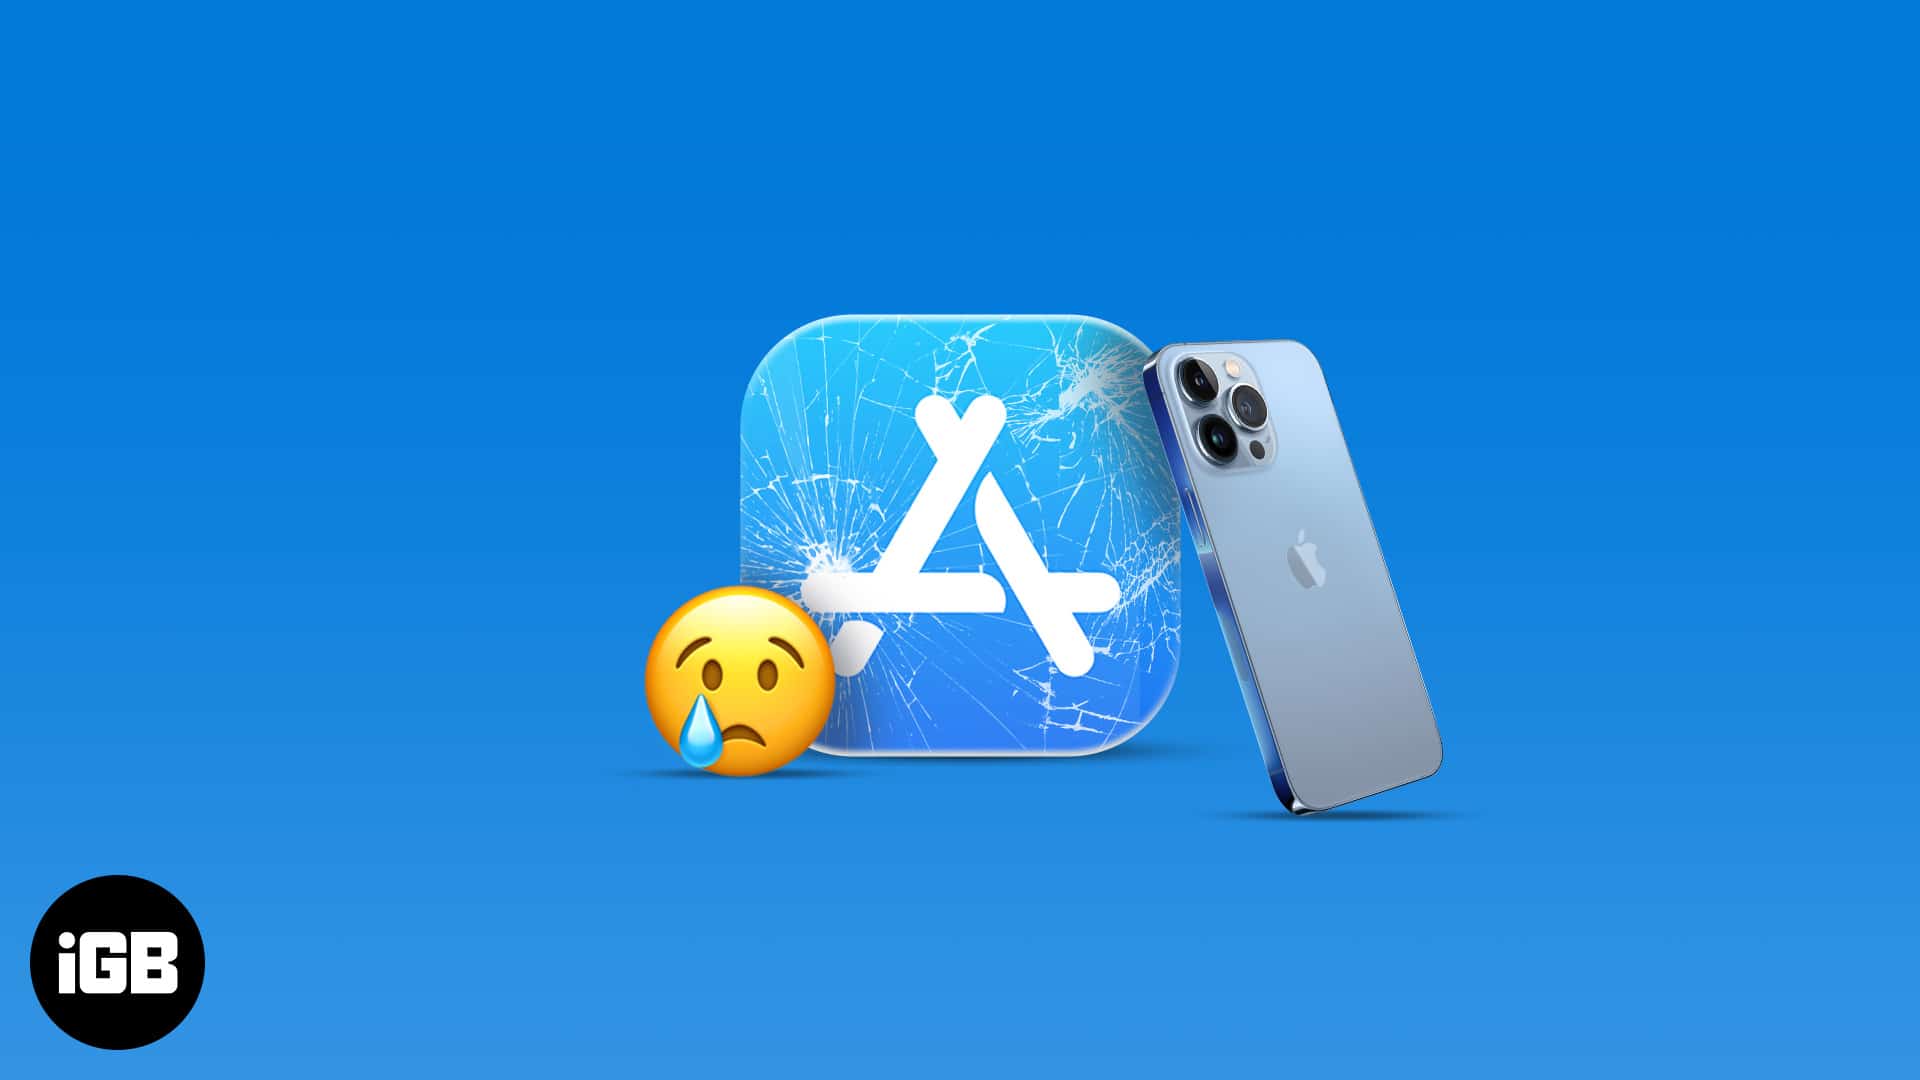 How to fix iphone crashing issues